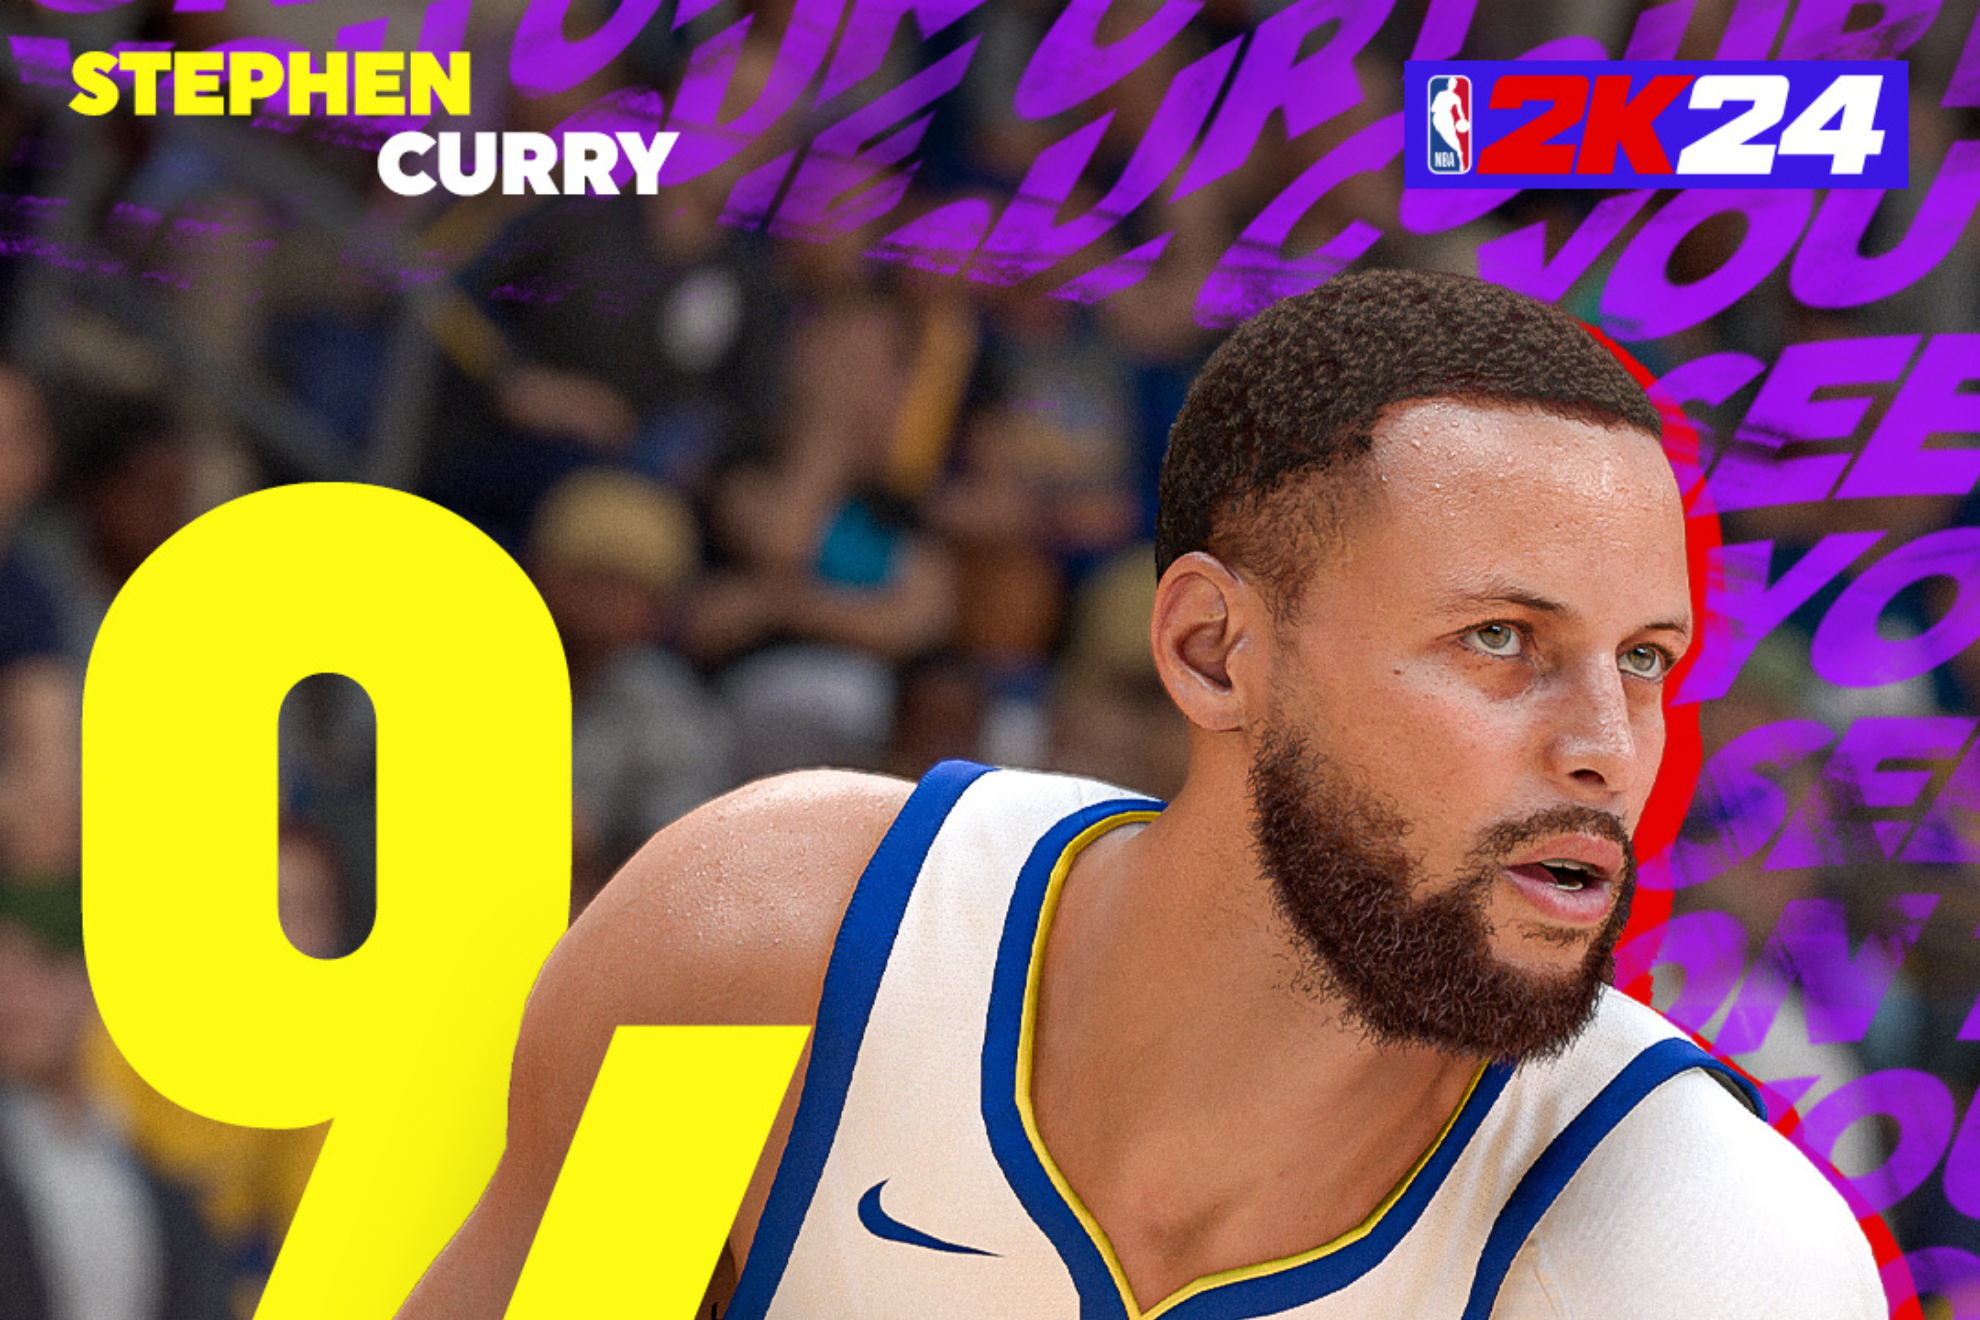 NBA 2K24: Who earned the top overall spot in player ratings?